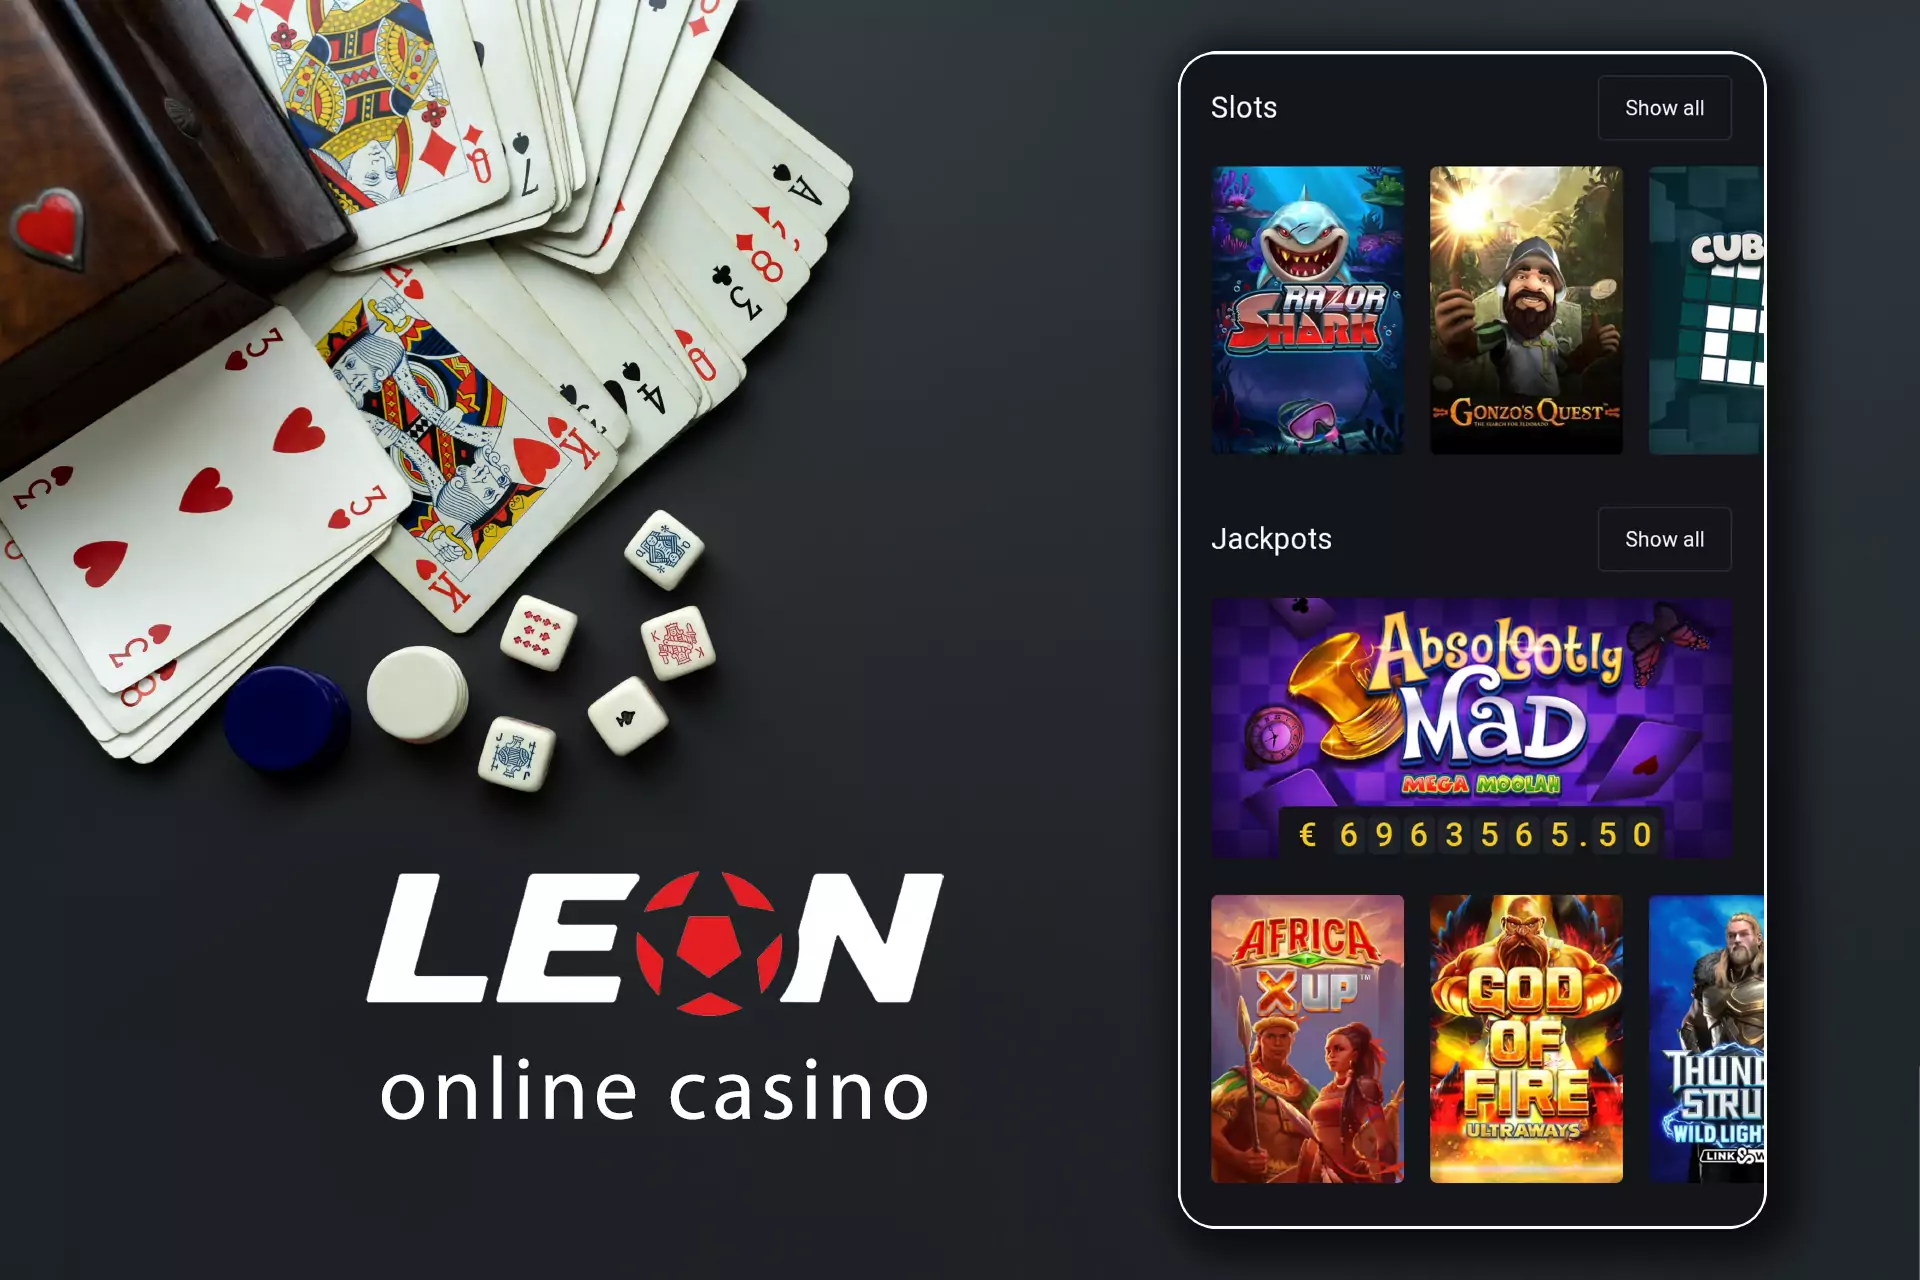 If you are a lover of casino games, go to the special section and start playing.